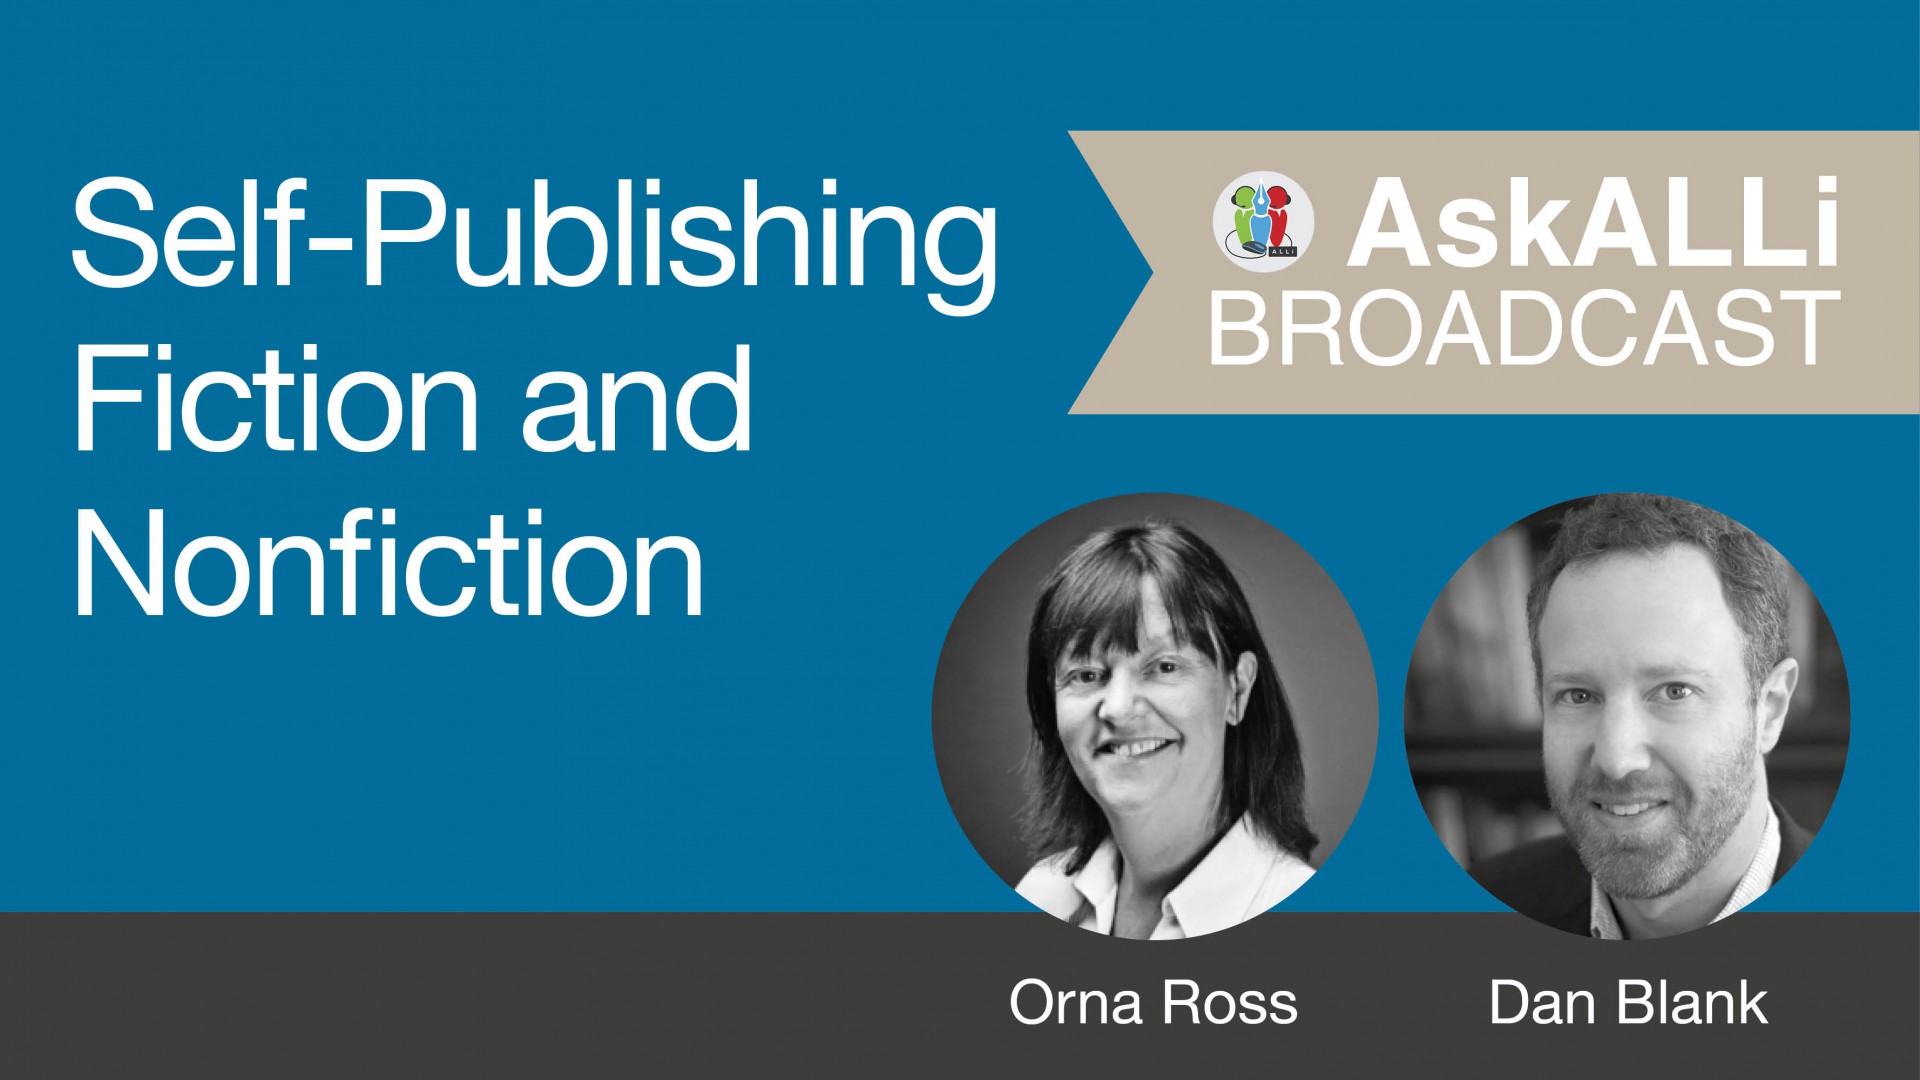 How To Be A Productive Writer And Publisher: AskALLi Self-Publishing Fiction And Nonfiction Podcast With Orna Ross And Dan Blank